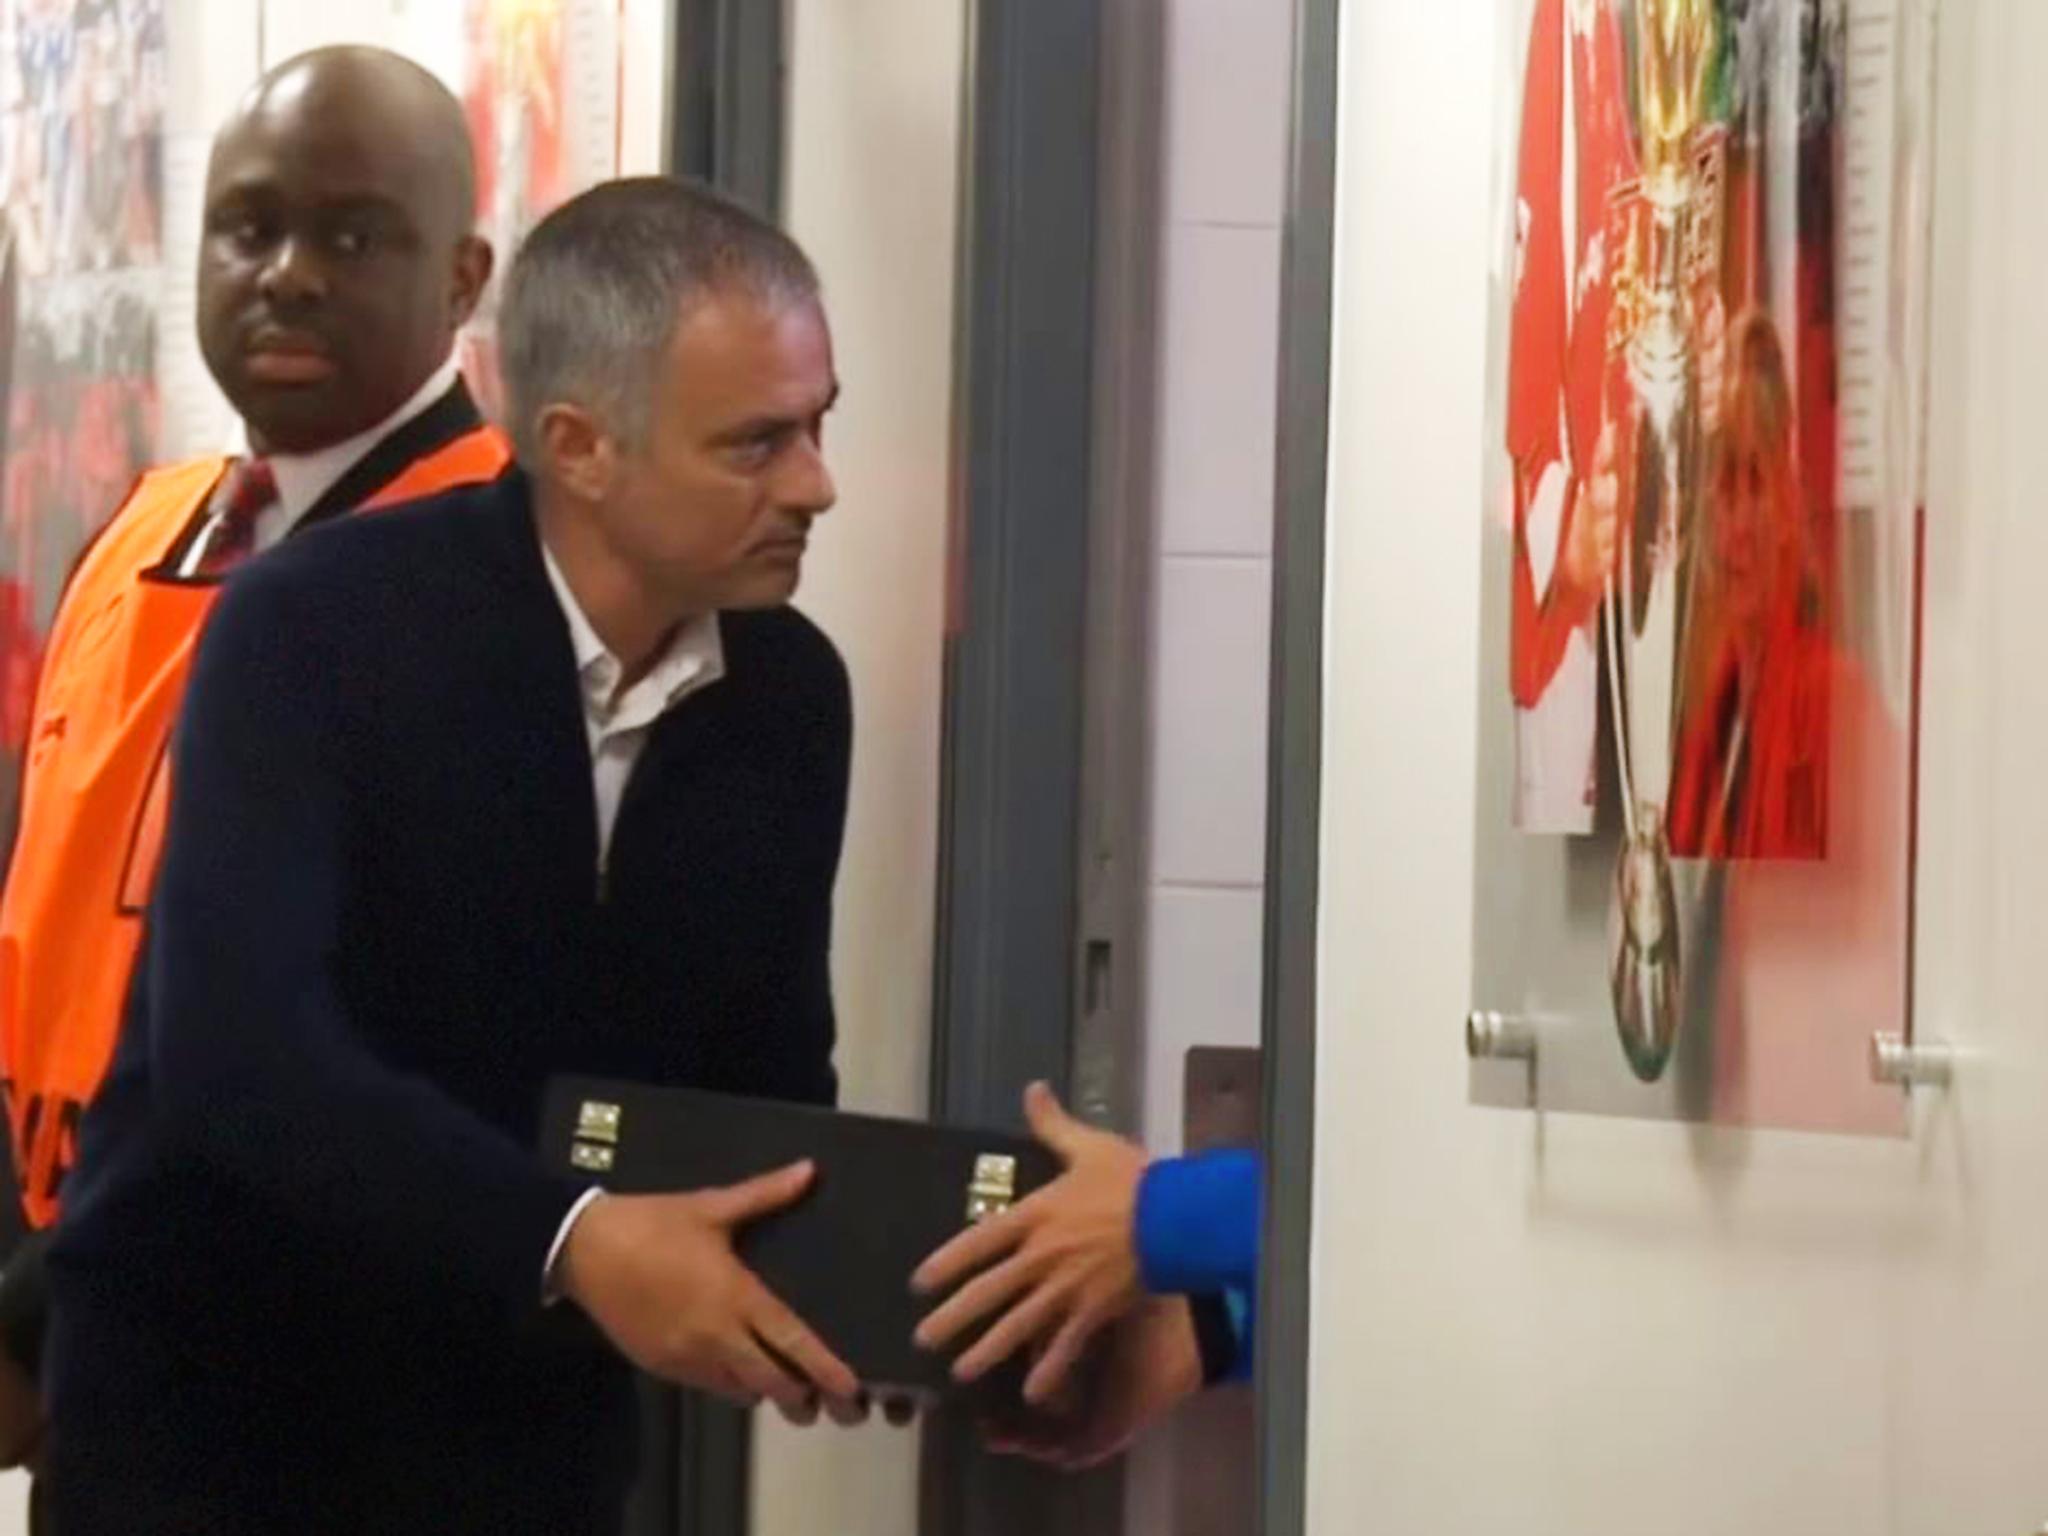 Mourinho was spotted handing an intriguing gift to Rostov's manager